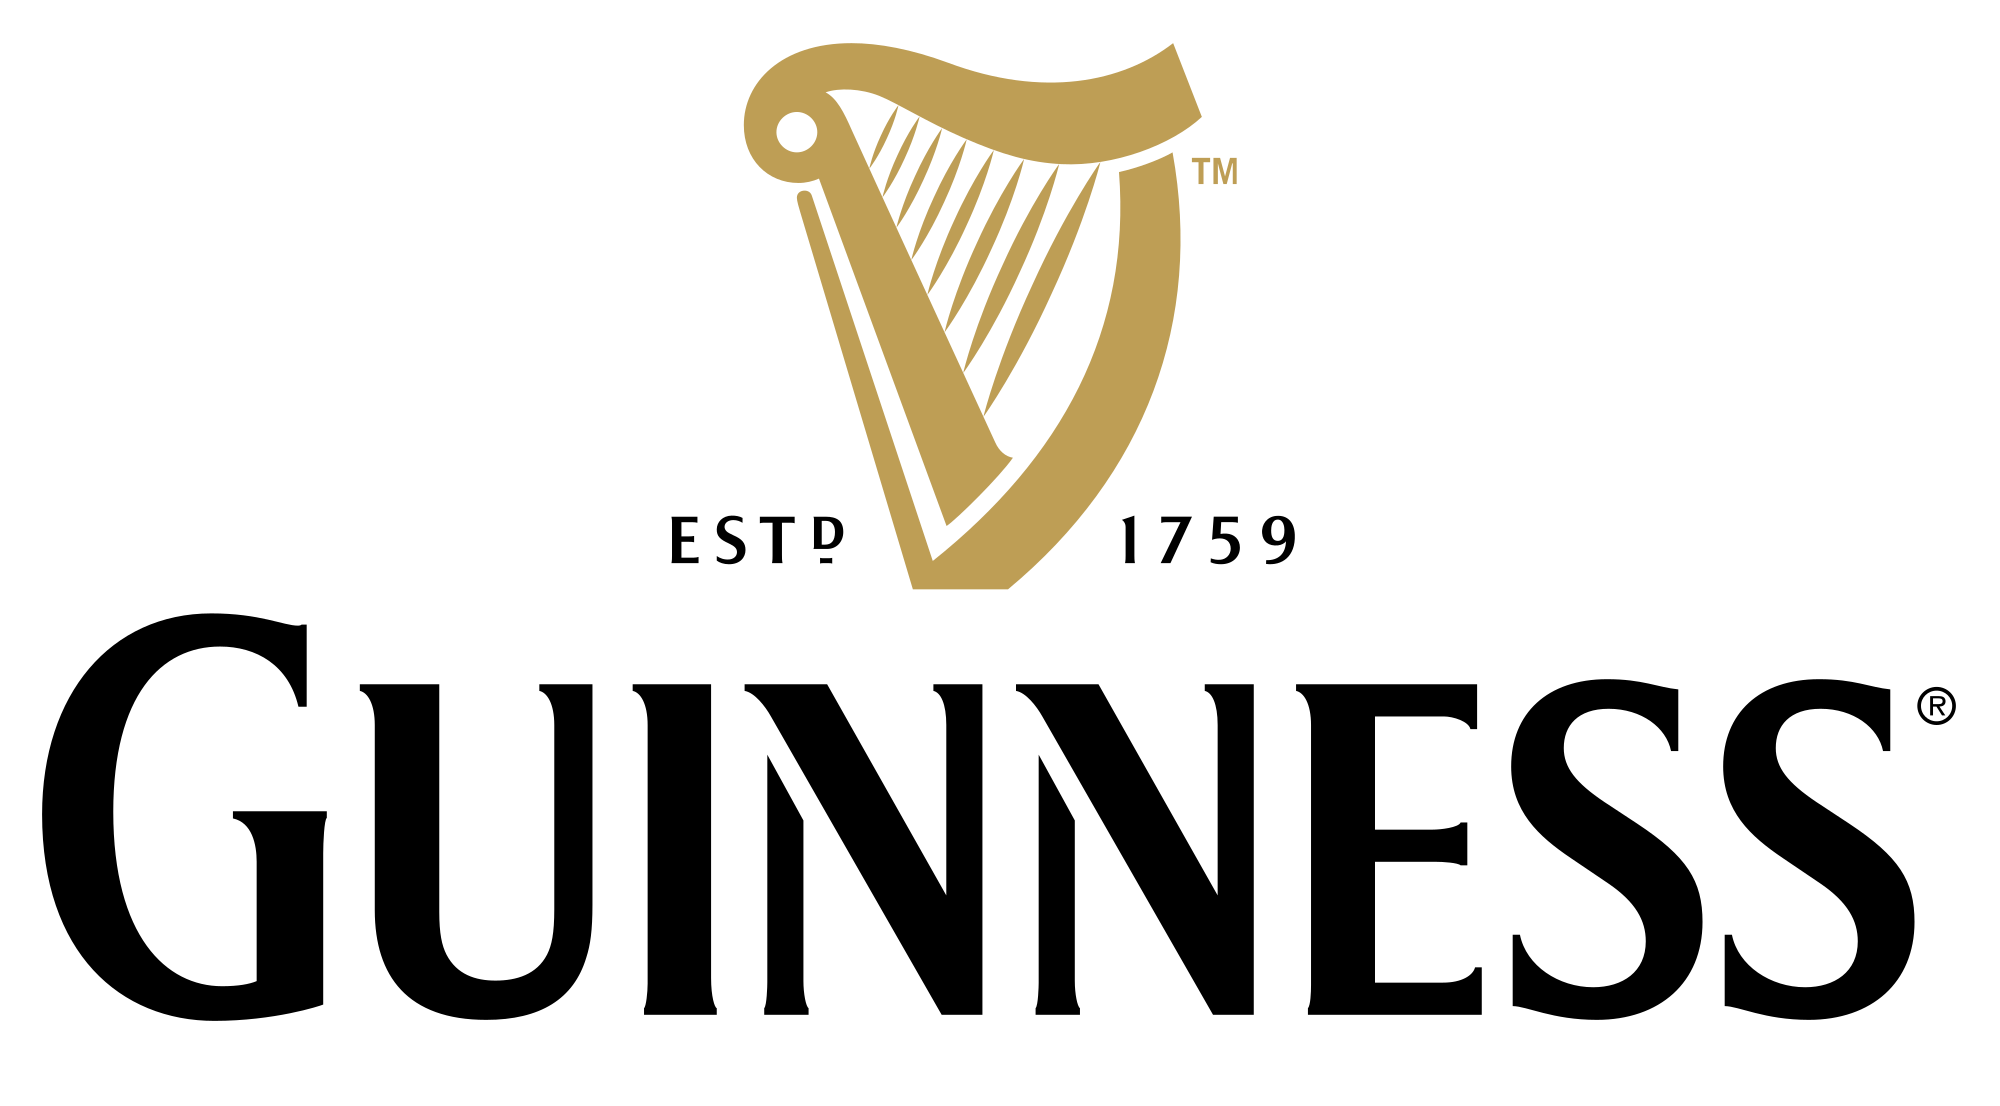 Guinness.png